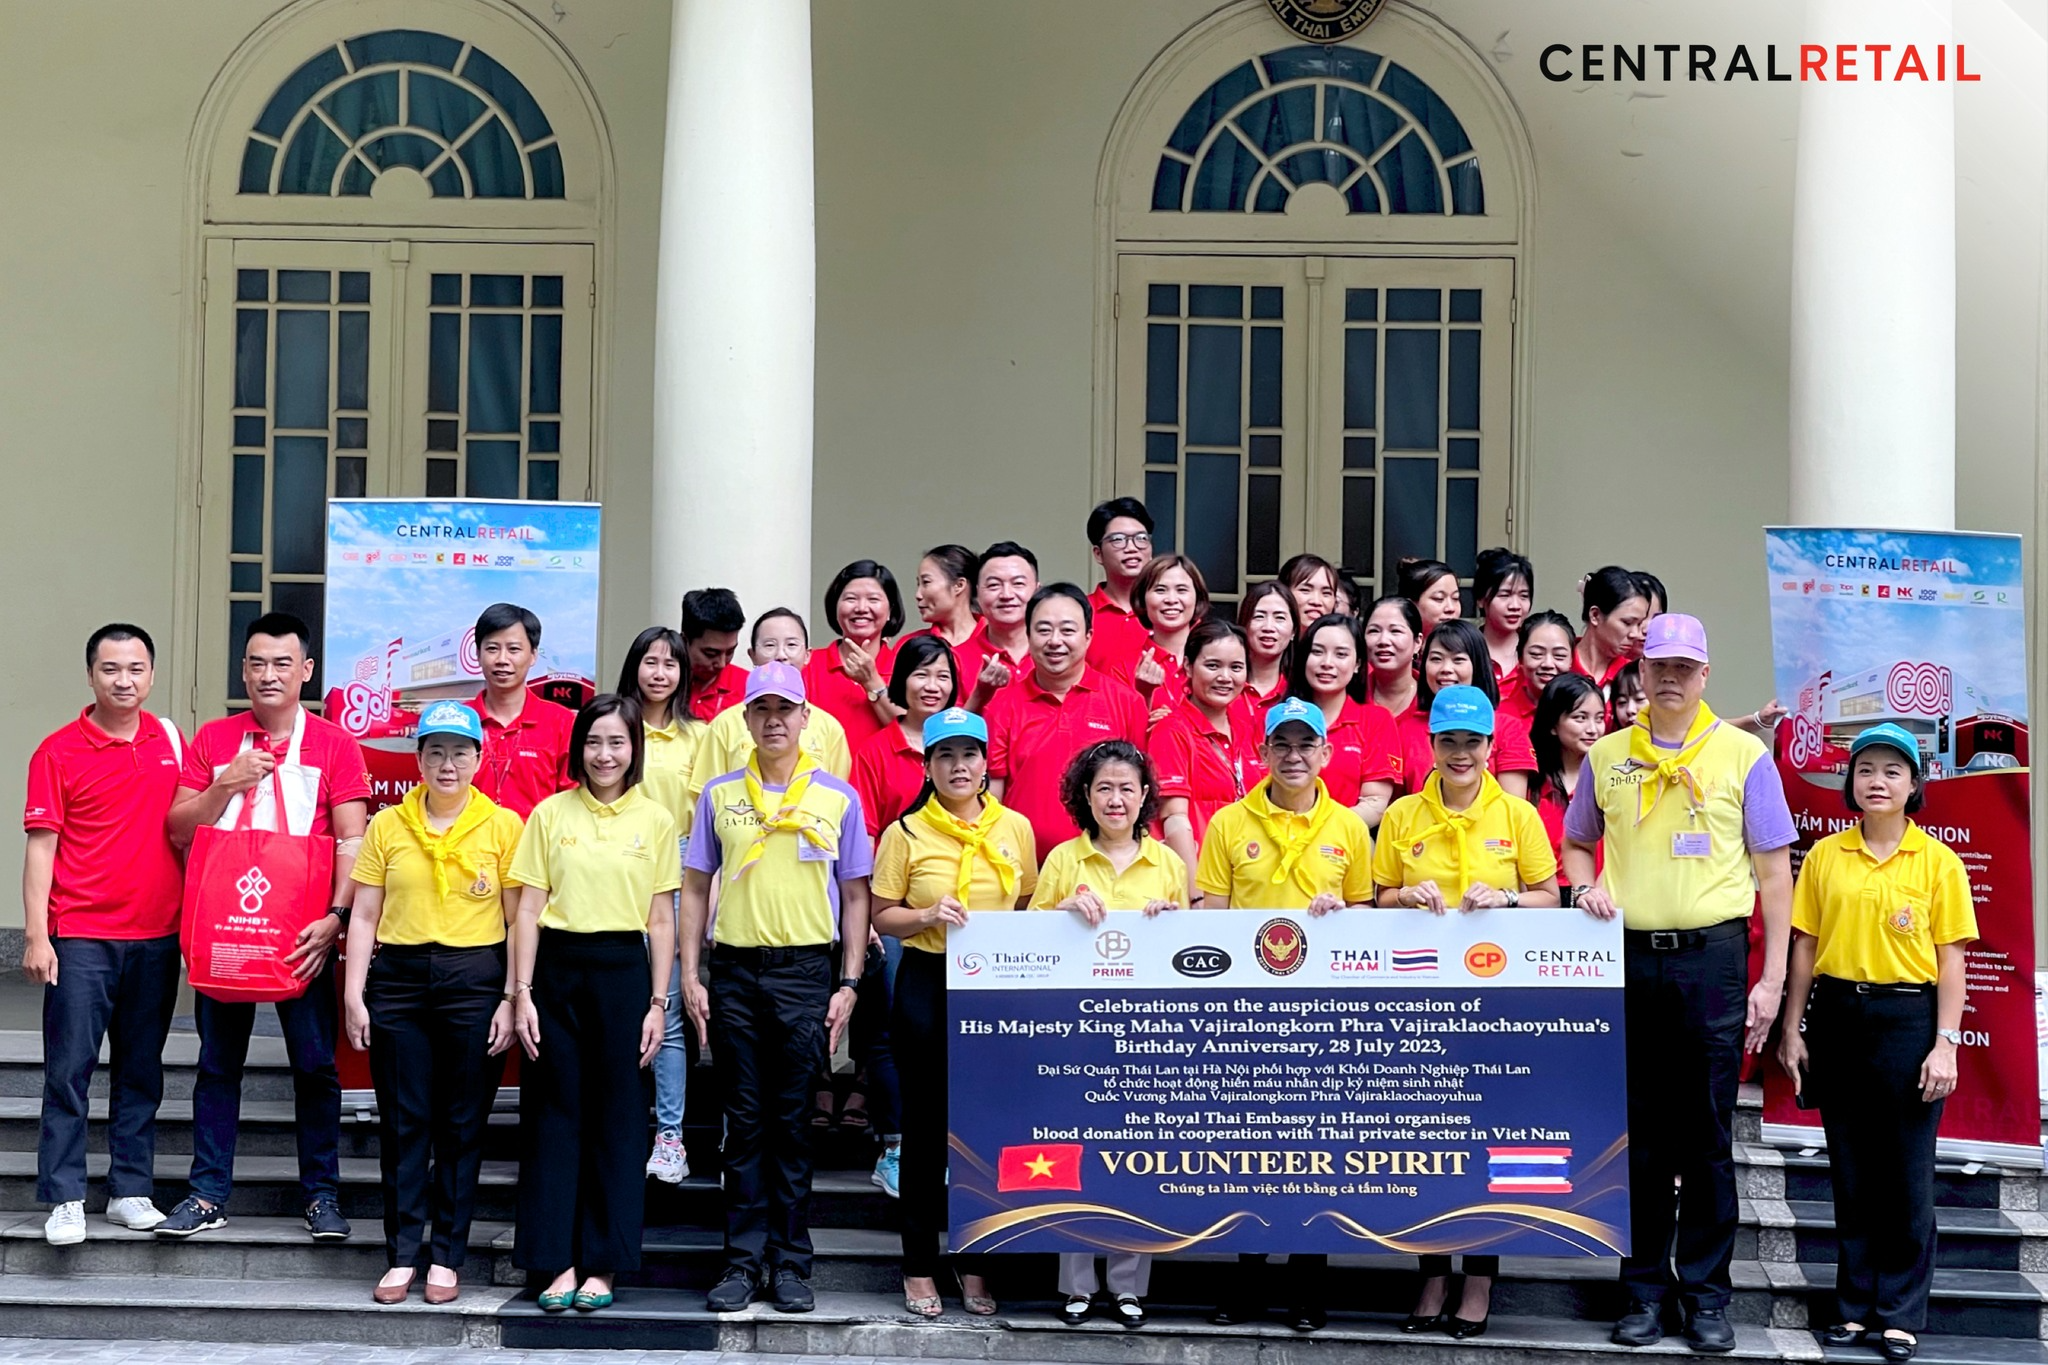 Central Retail in Vietnam joins the blood donation drive organized by the Royal Thai Embassy in Hanoi